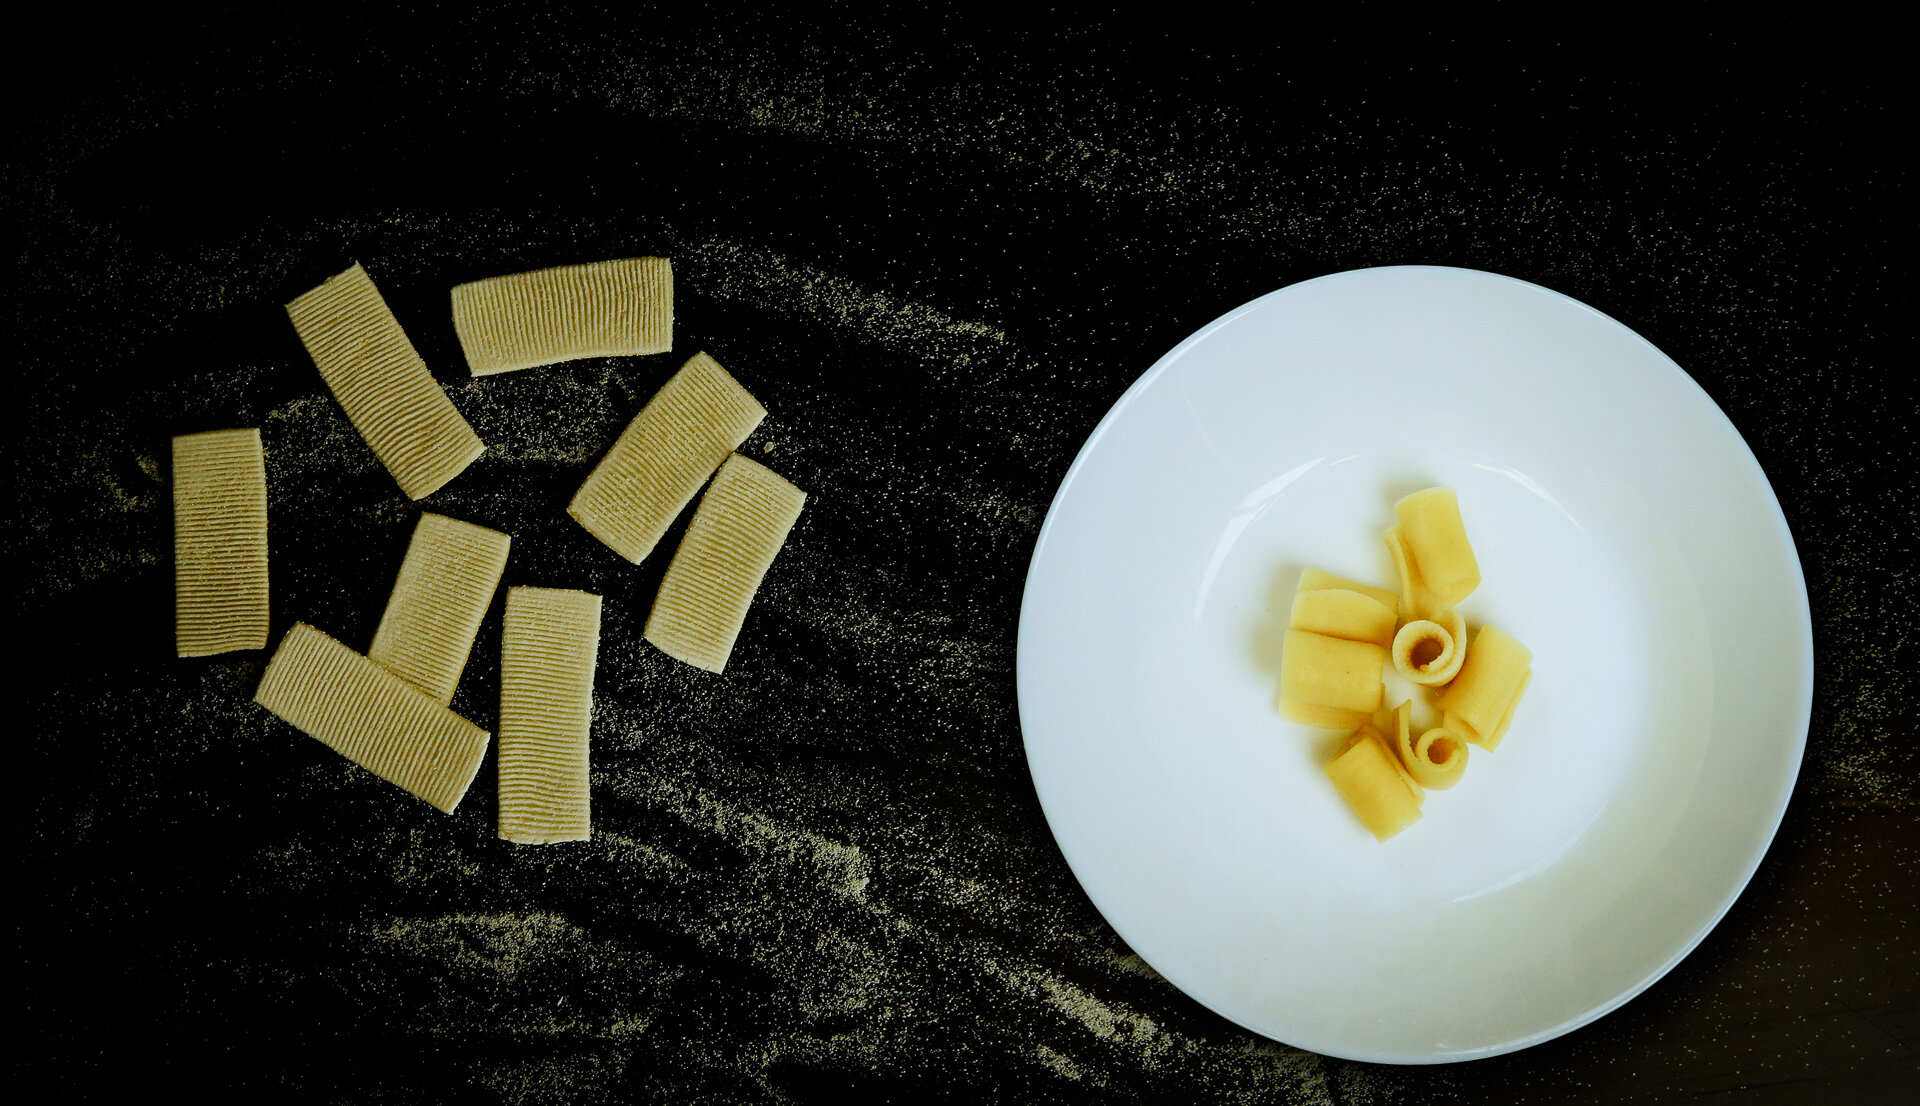 An photograph shows a white plate with cooked rigatoni, on the side in contrast are dried, flat pastas similar in shape